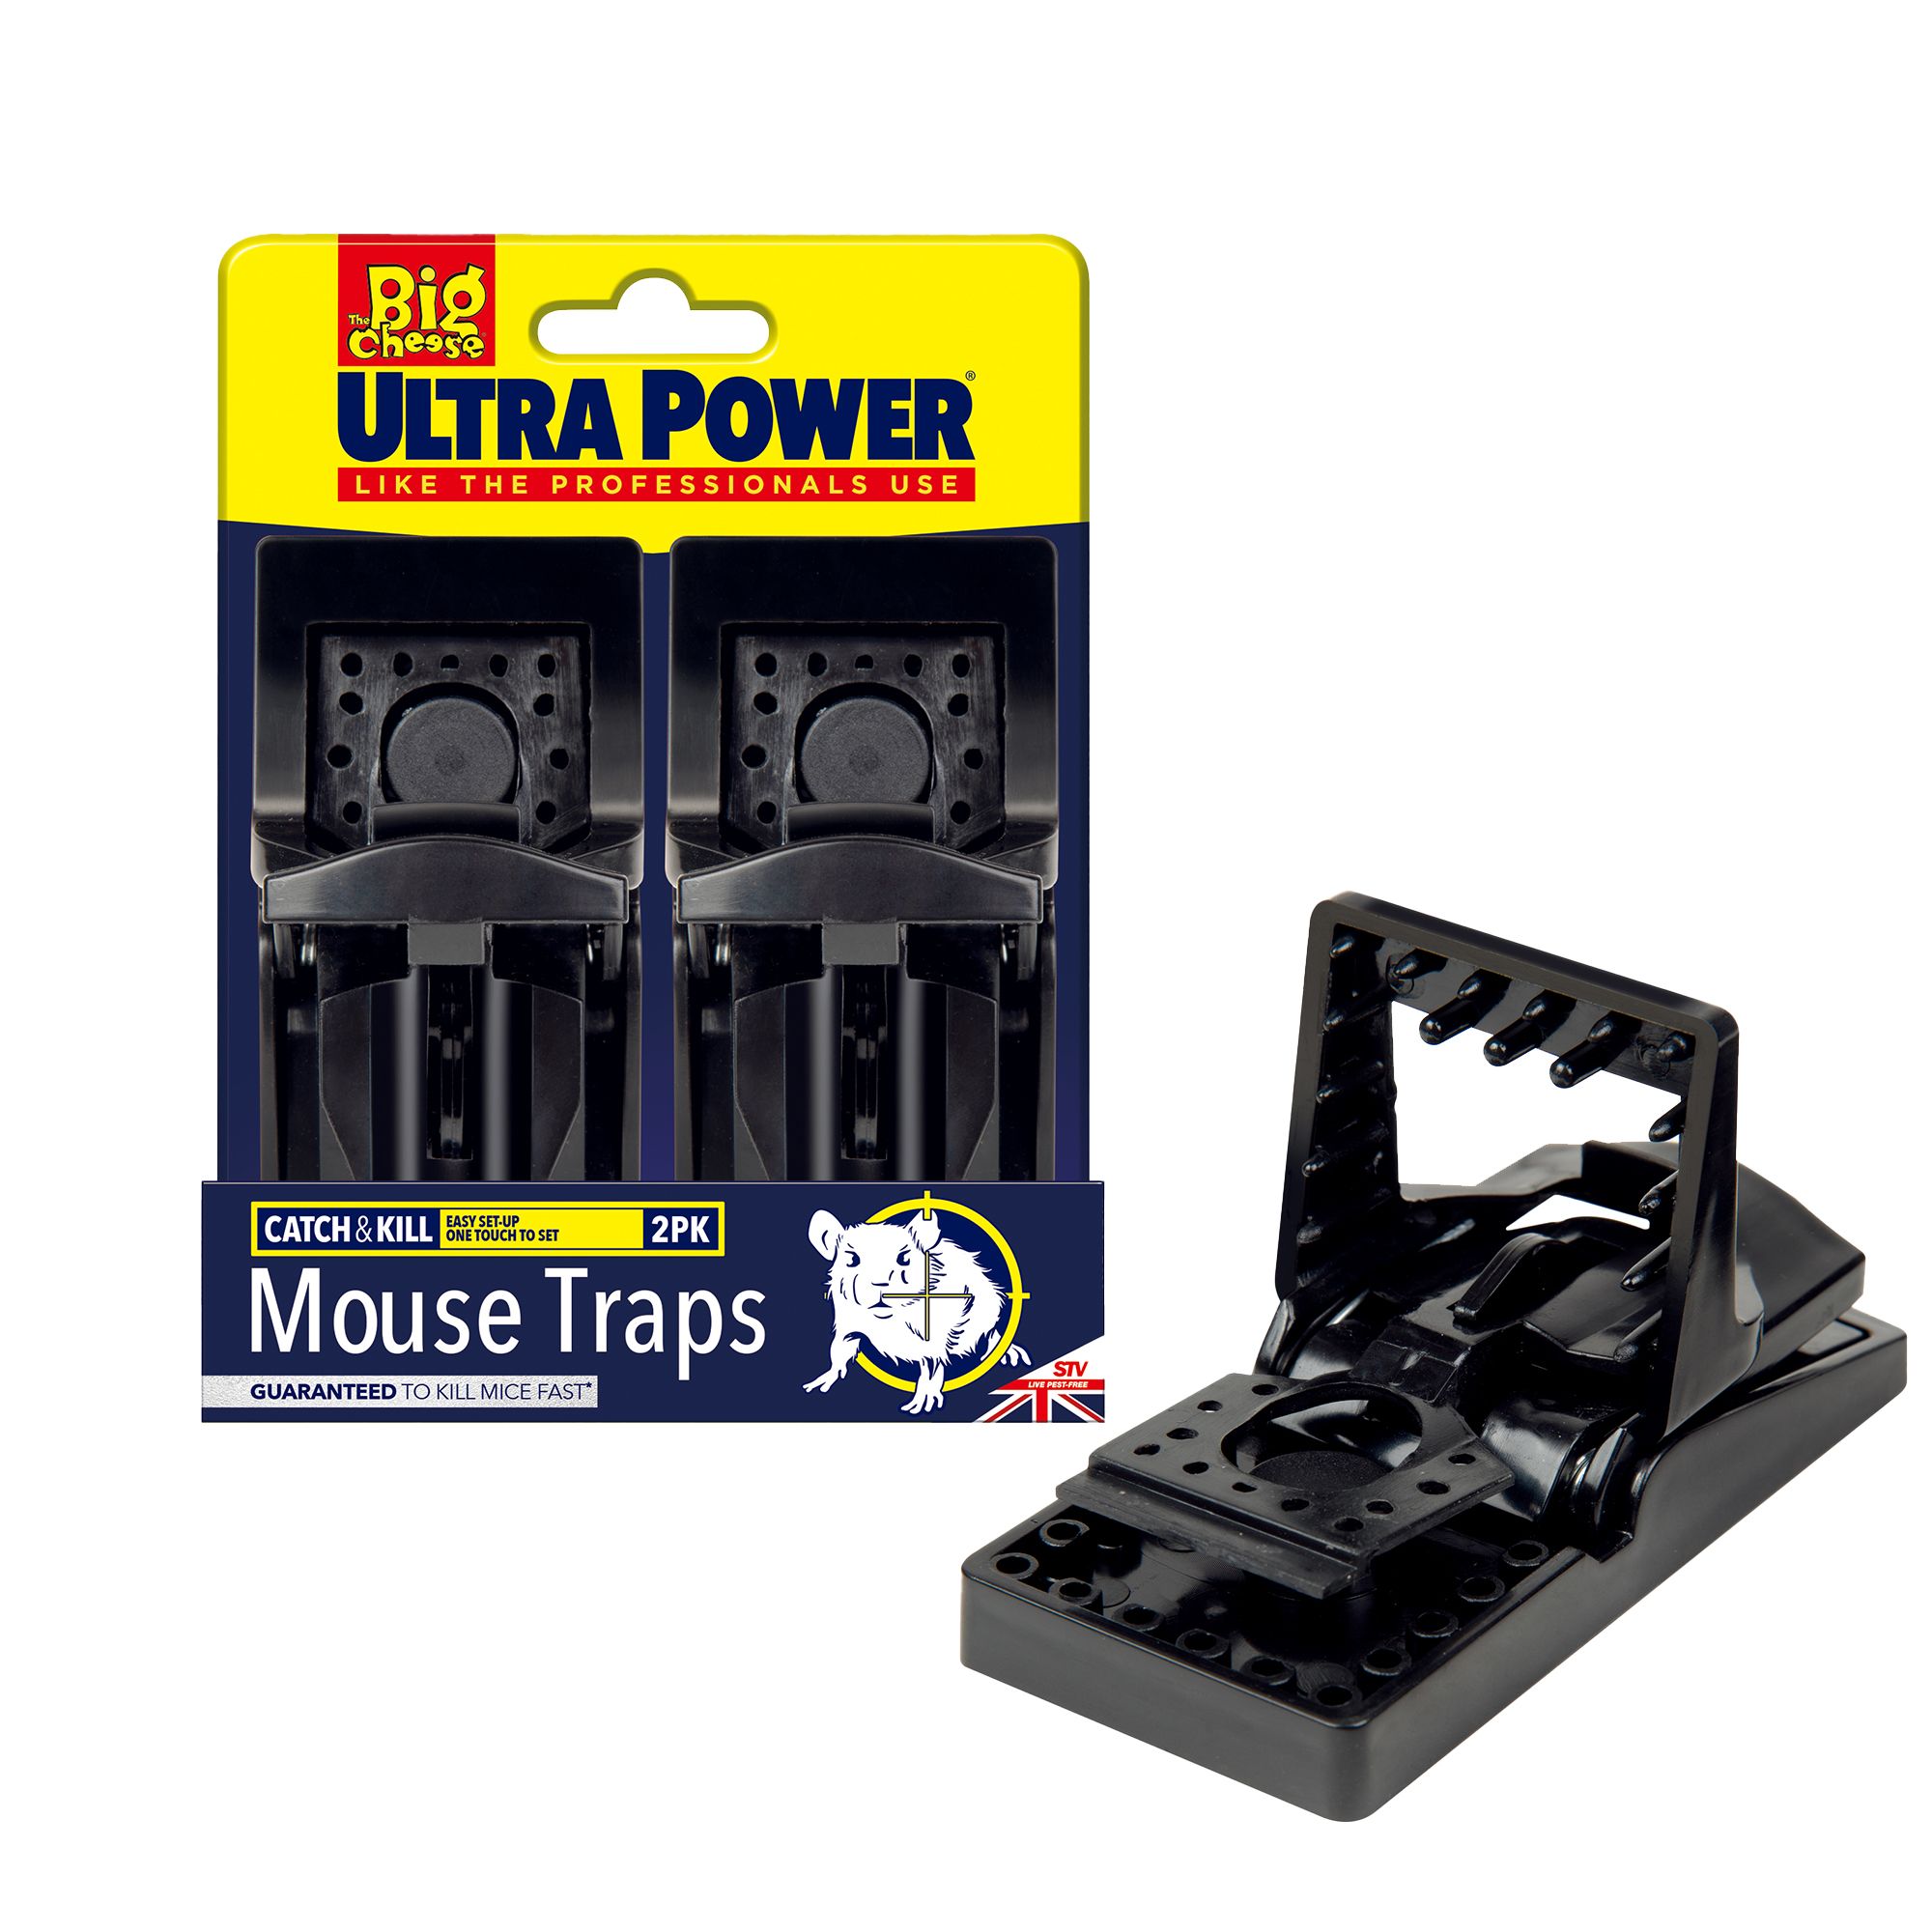 The Big Cheese - Ultra Power Live Multi-Catch Mouse Trap – SPR Centre